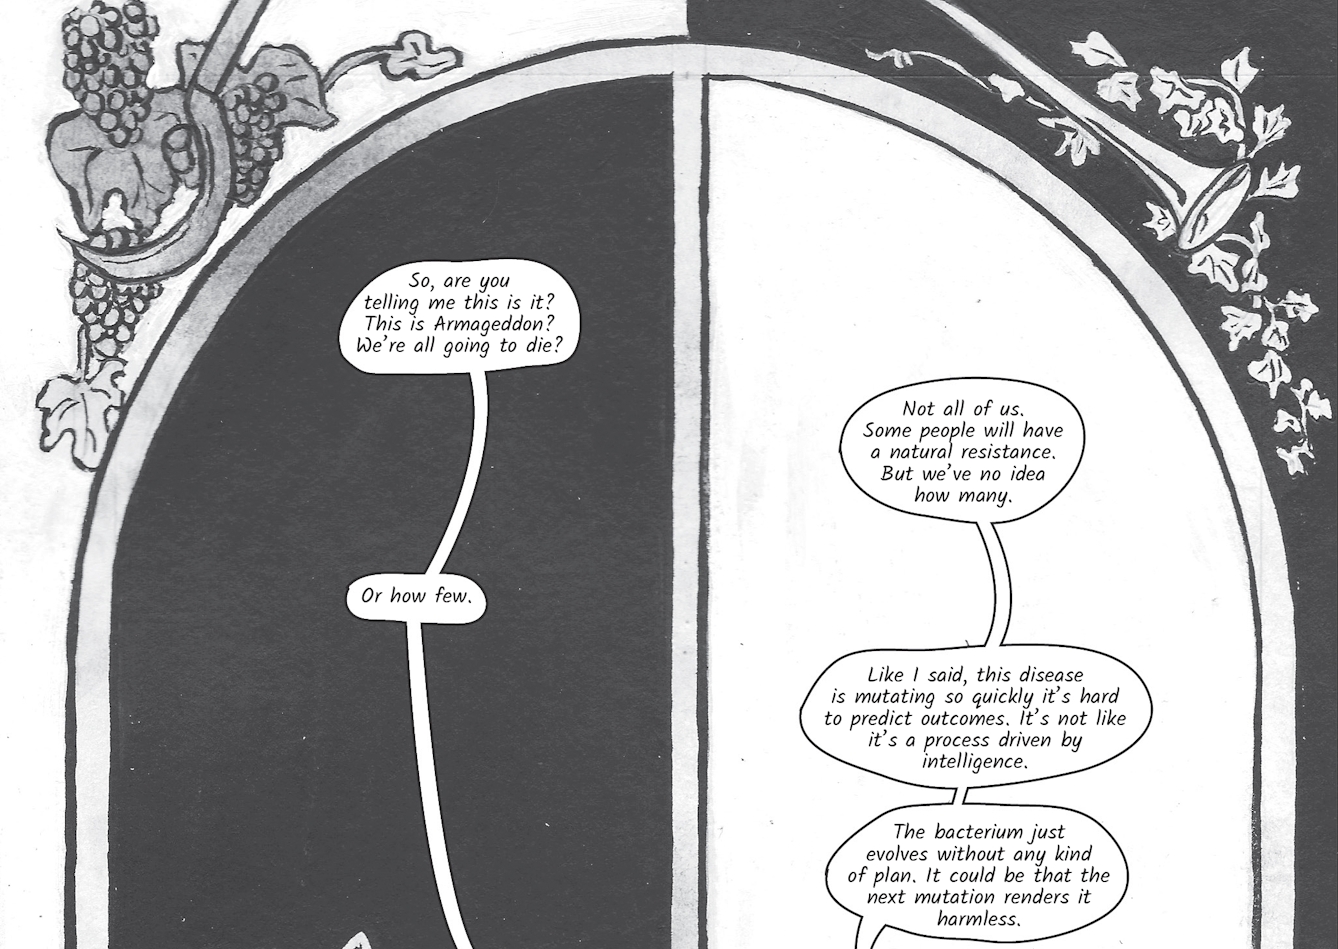 The greyscale graphic novel continues. The fourteenth and fifteenth image are one large illustration  split across two images. The whole combined image shows a large arched window with sculpted decoration in the top left and right corners of grapes on a vine and a trumpet horn. At the window are the women looking out, Zoe on the left against a black background and Dr Siddiqui on the right against a white background. In the fourteenth image Zoe asks, 'So, are you telling me this is it? This is Armageddon? We’re all going to die?'. Dr Siddiqui replies 'Not all of us. Some people will have a natural resistance. But we’ve no idea how many.'. 'Or how few' interjects Zoe, but Dr Siddiqui continues, 'Like I said, this disease is mutating so quickly it’s hard to predict outcomes. It’s not like it’s a process driven by intelligence. The bacterium just evolves without any kind of plan. It could be that the next mutation renders it harmless.'